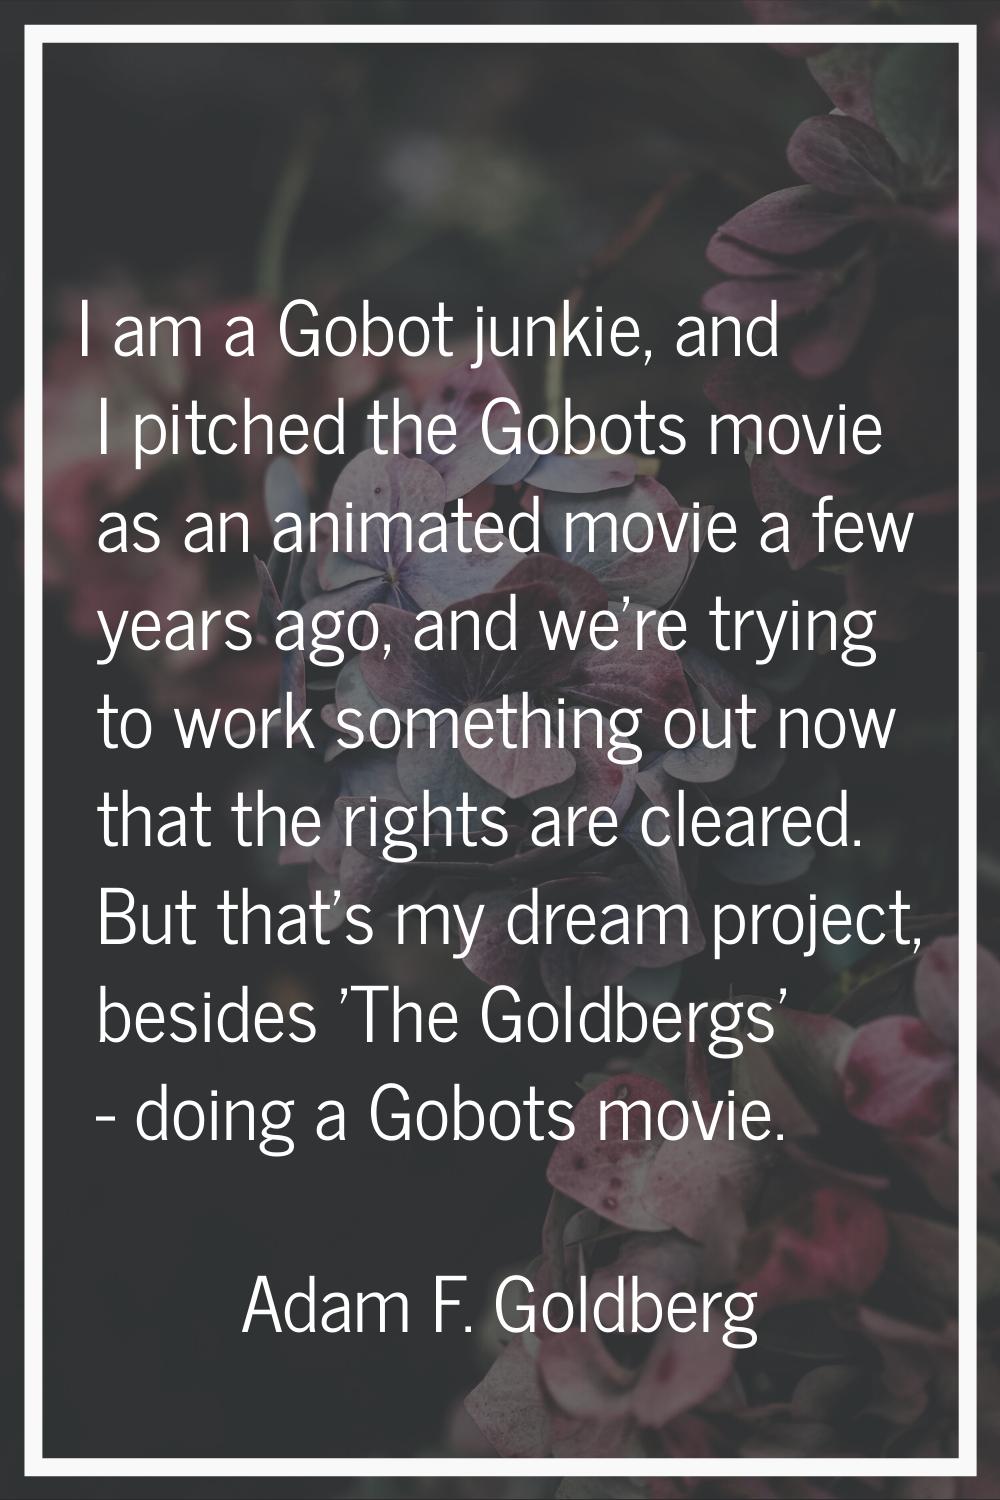 I am a Gobot junkie, and I pitched the Gobots movie as an animated movie a few years ago, and we're